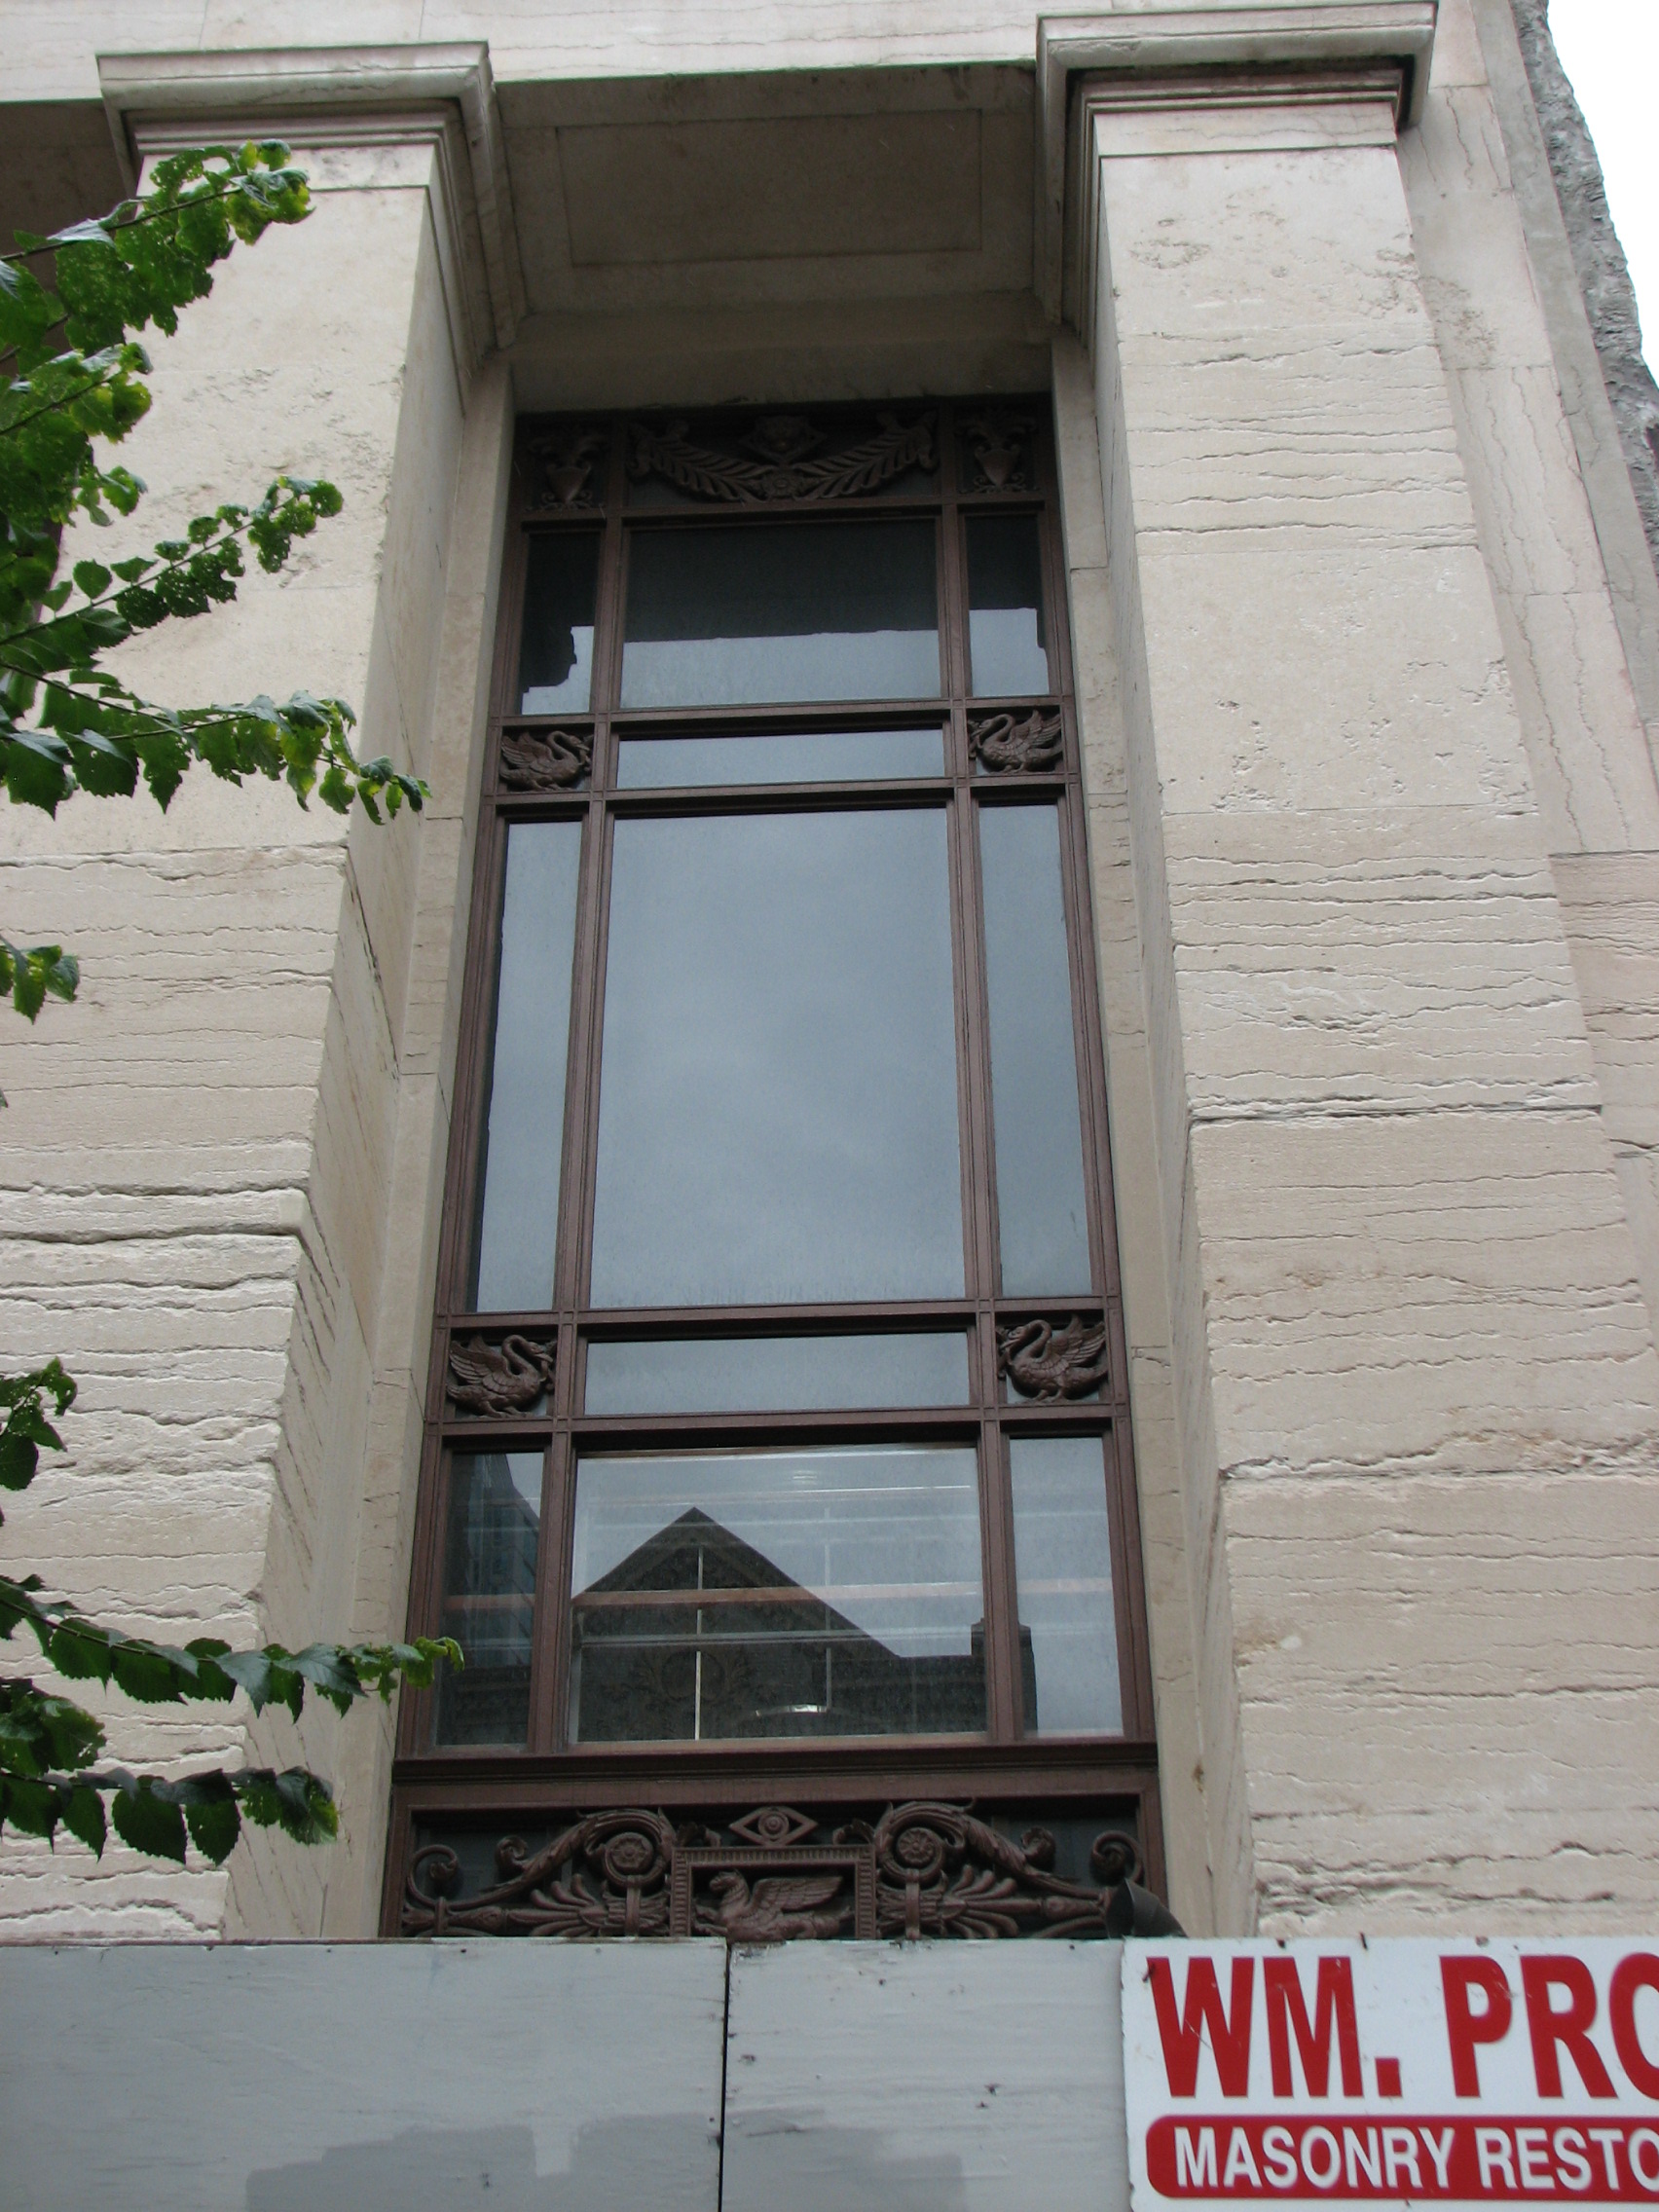 The building’s vertical columns are broken by deep-set windows with decorative frames.